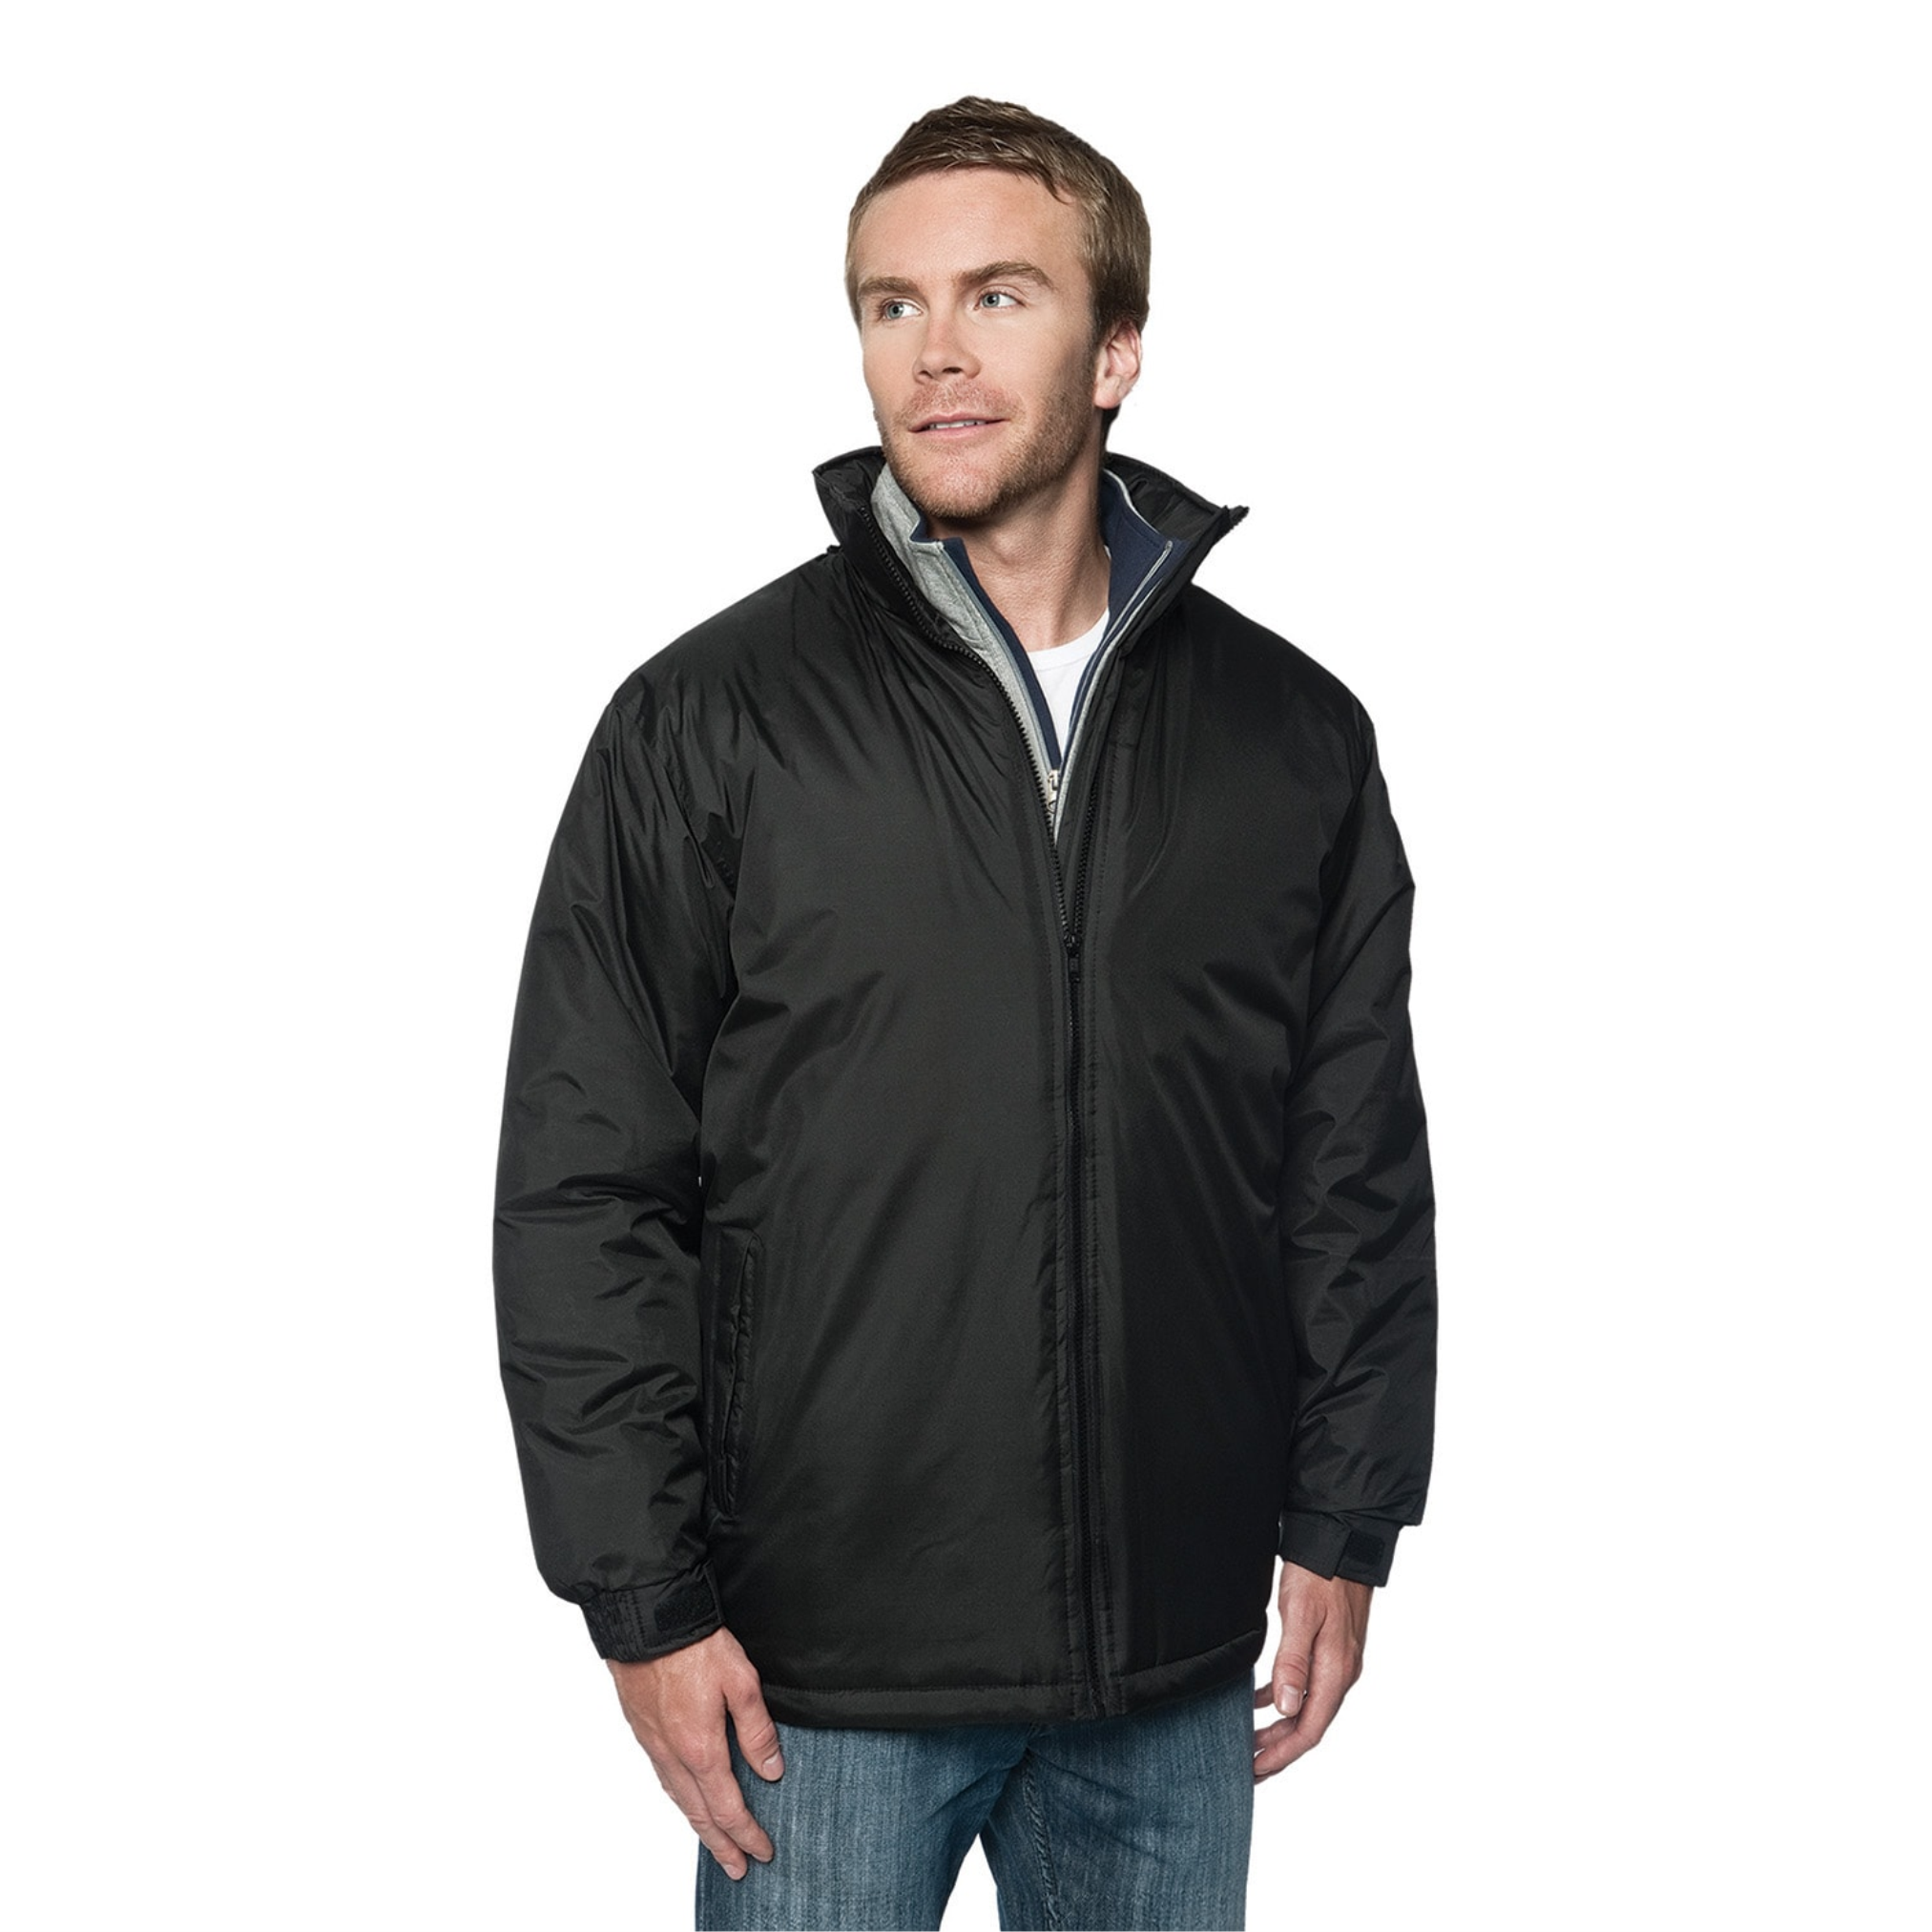 Commuter - Insulated Men's Parka with Stowaway Hood - CX2 L09040